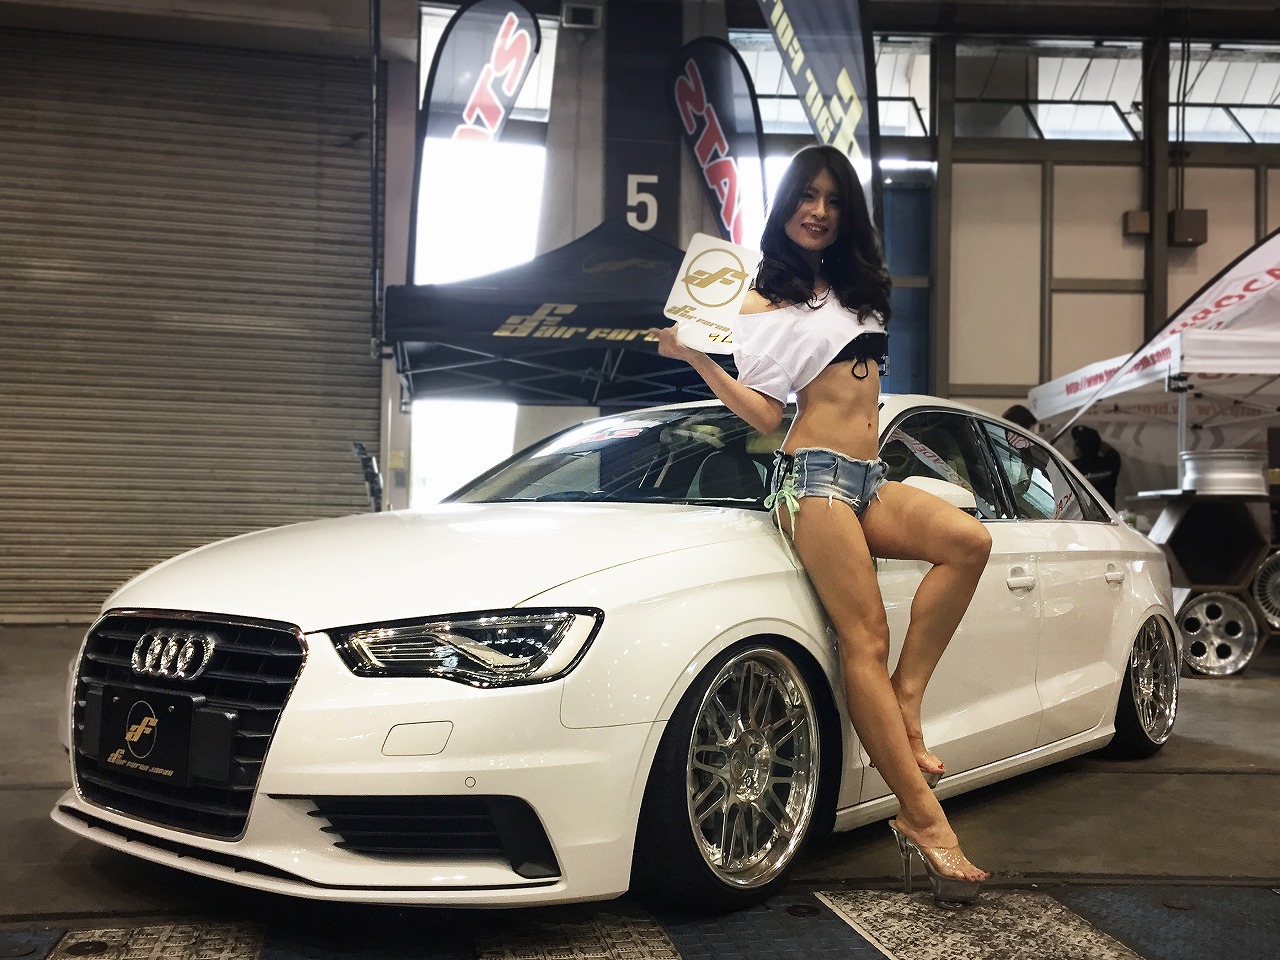 Wekfest usa 2017 japan 名古屋ポートメッセ　Air Force Suspension エアサスブース